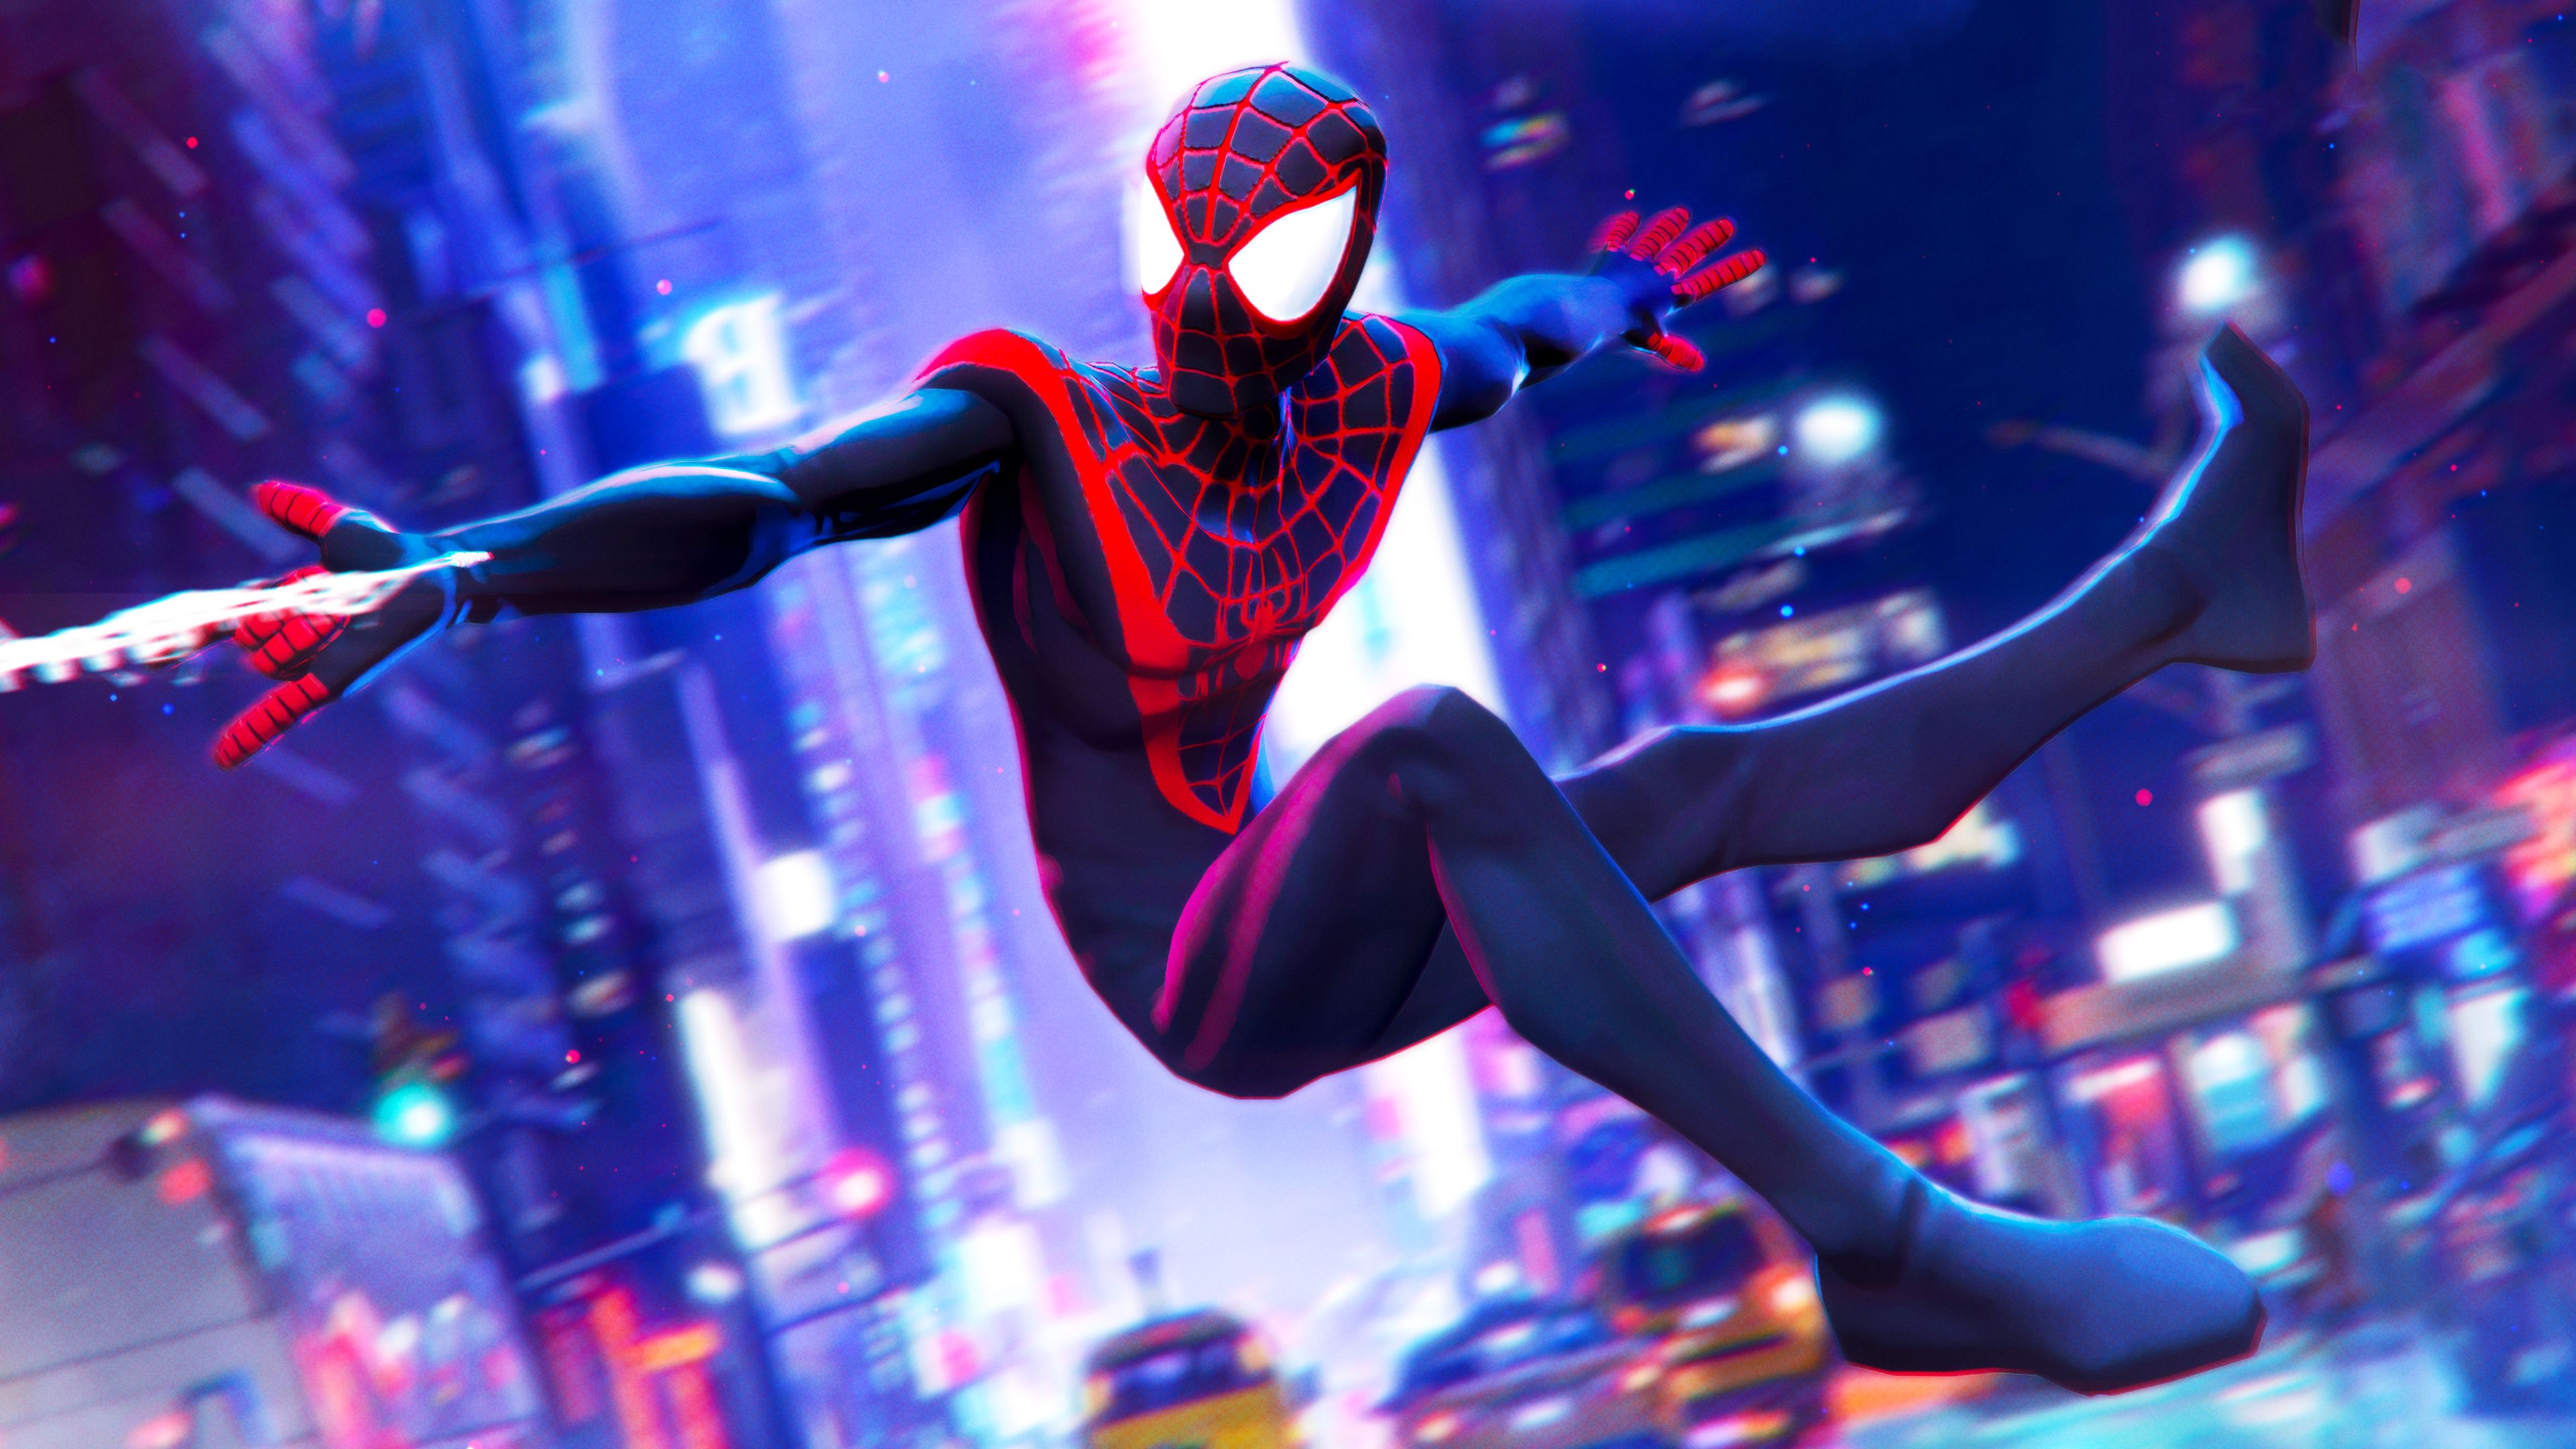 3840x2160 3d Miles Morales Hd Superheroes 4k Wallpaper Image Background Photo And Picture